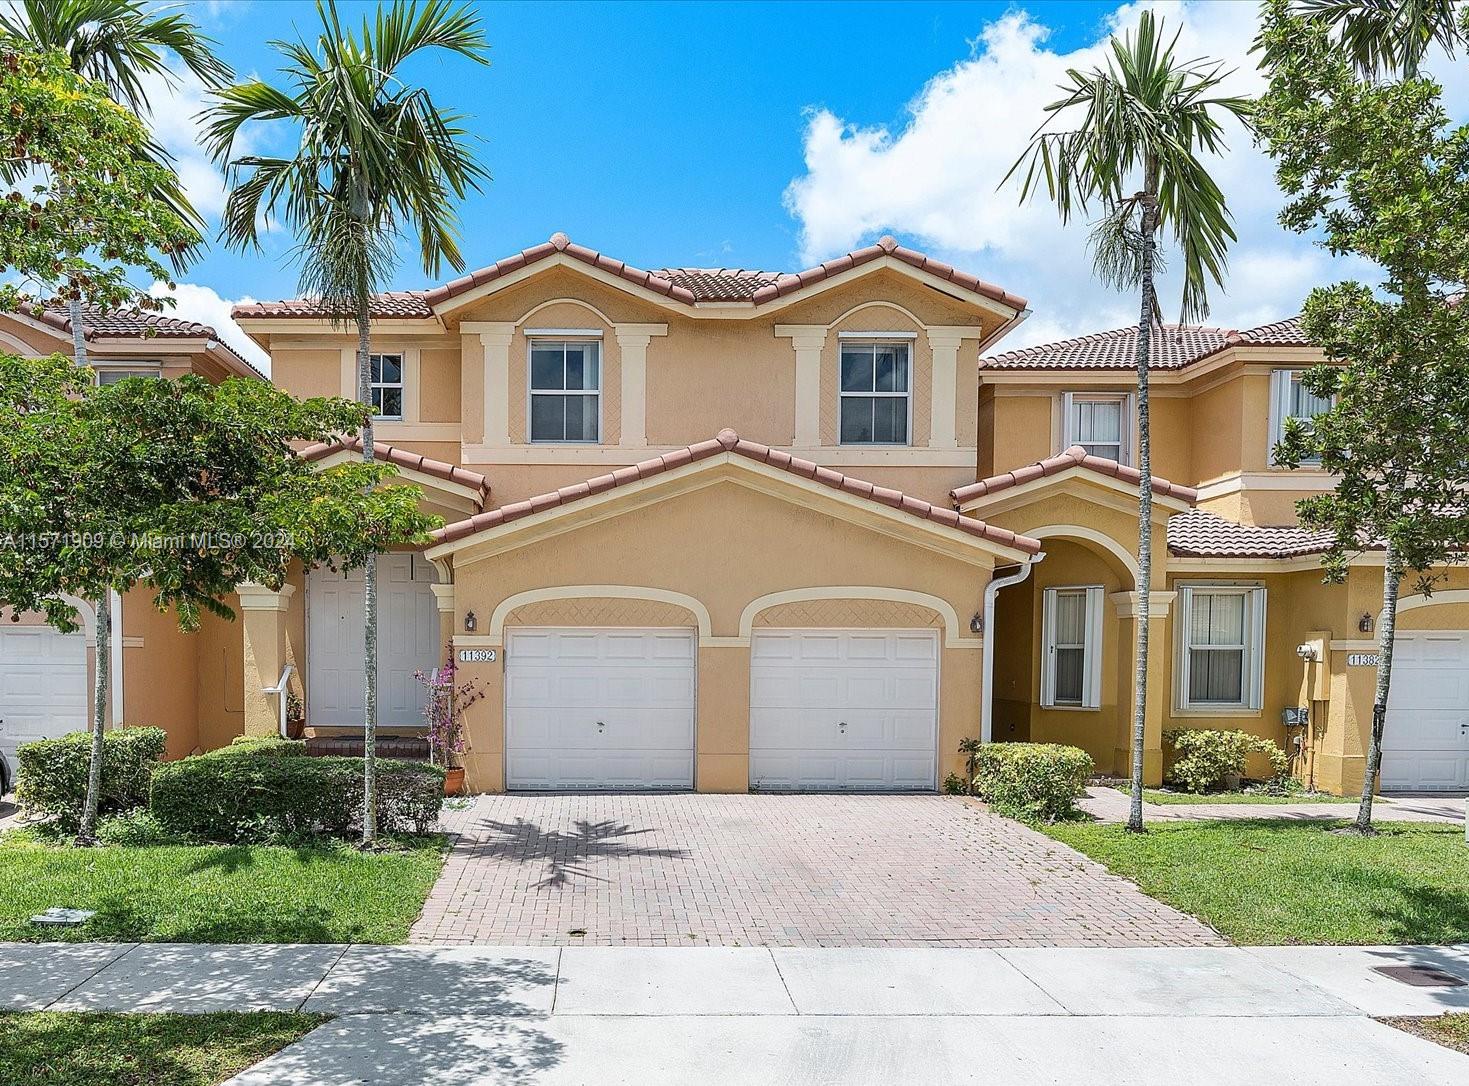 11392 SW 137th Pl 11392, Miami, Florida 33186, 4 Bedrooms Bedrooms, ,2 BathroomsBathrooms,Residential,For Sale,11392 SW 137th Pl 11392,A11571909